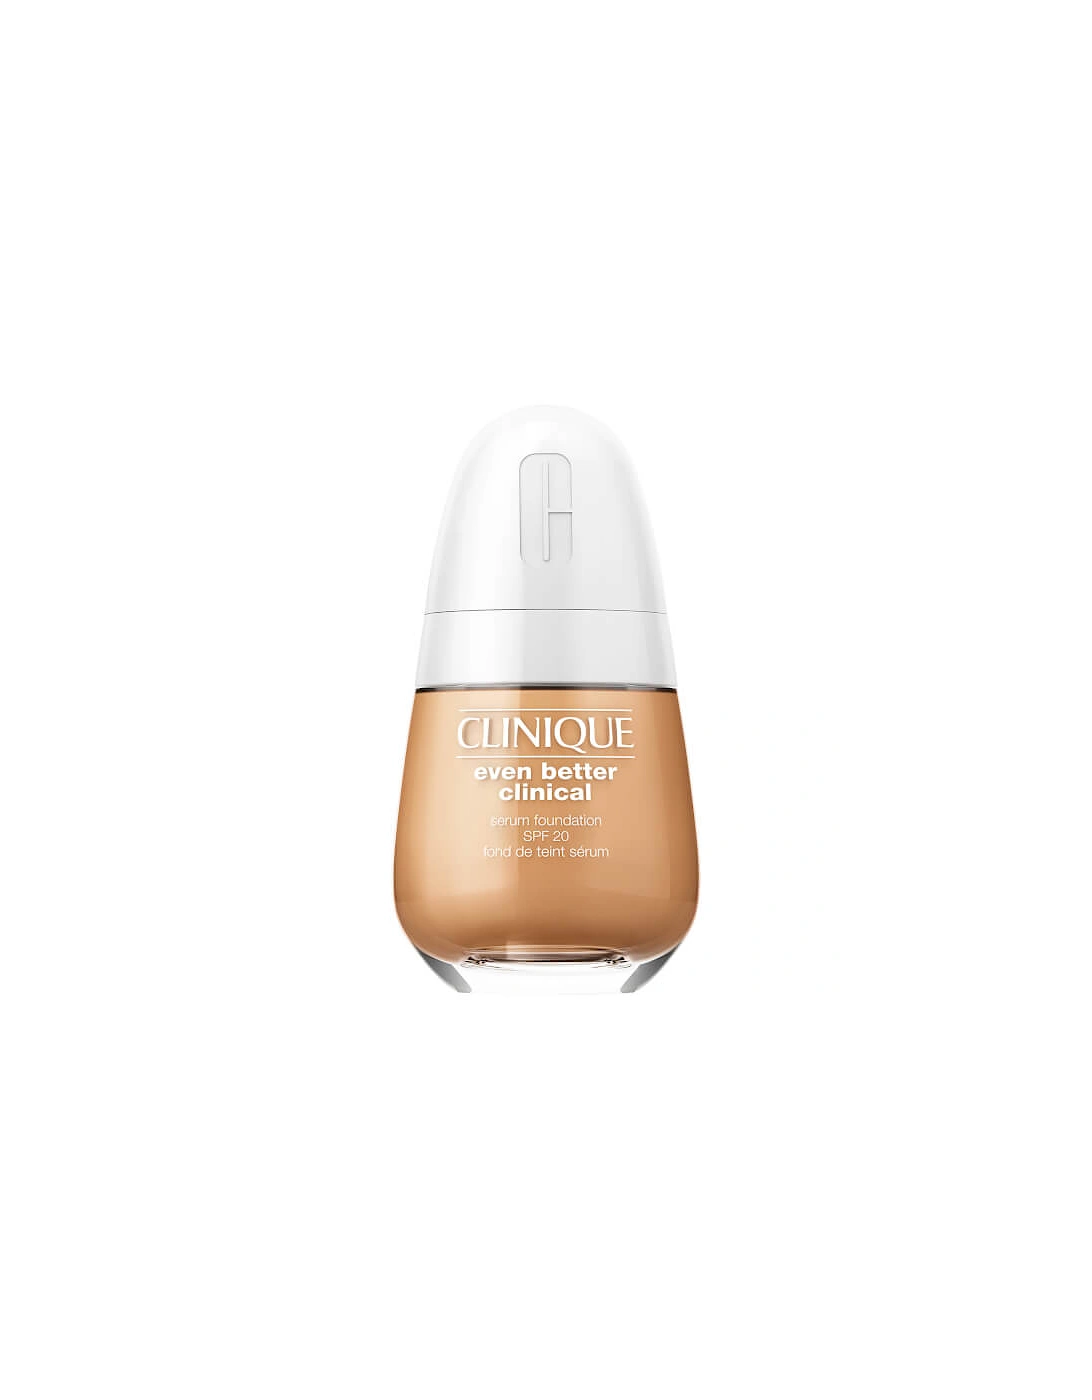 Even Better Clinical Serum Foundation SPF20 - Oat - Clinique, 2 of 1